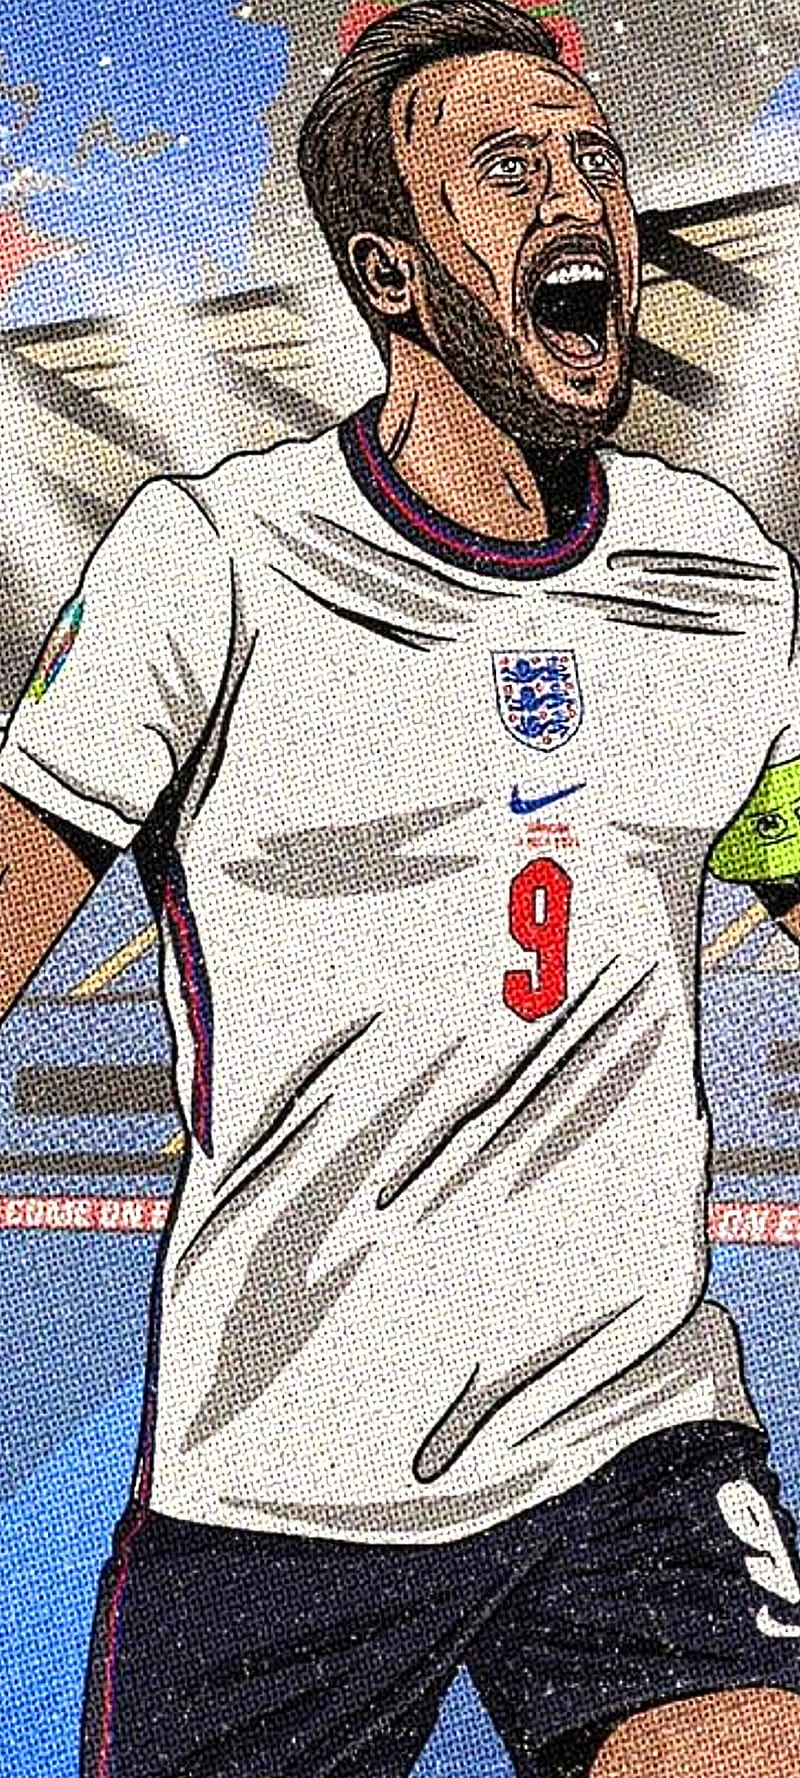 Awesome Harry Kane wallpaper I found from 9 months ago that updwyer made   rcoys